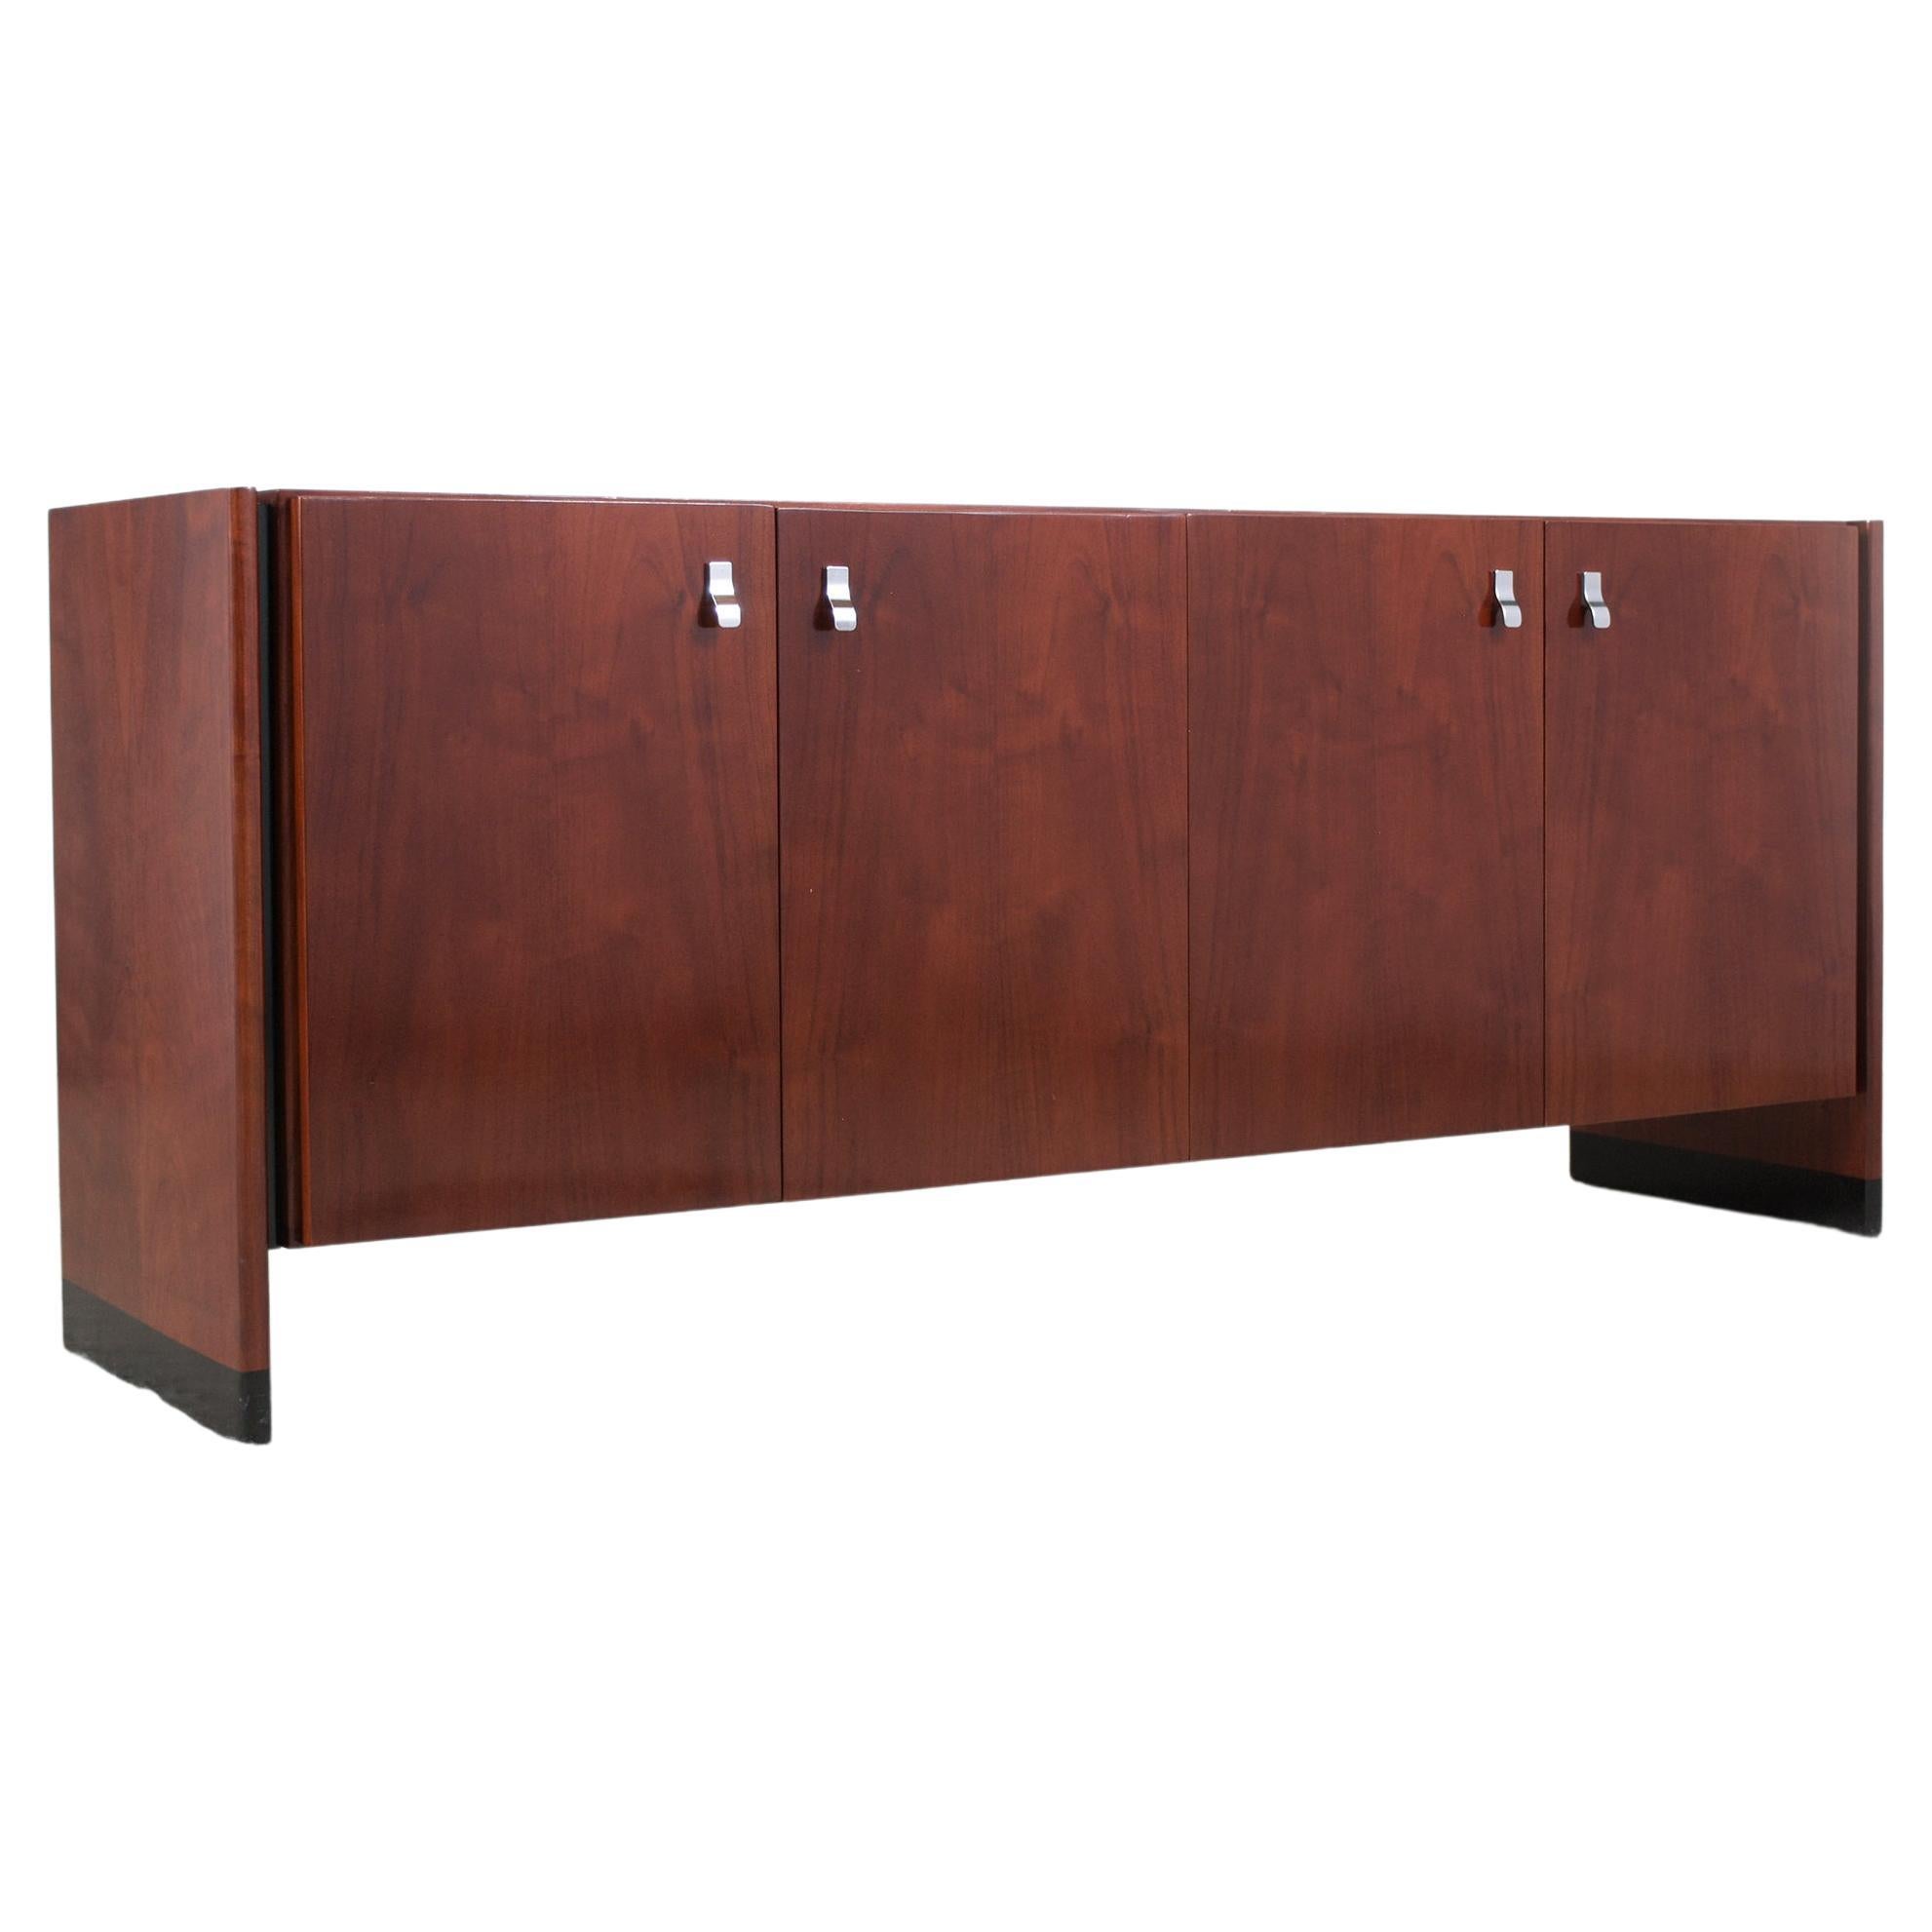 1960s Mid-Century Modern Lacquered Credenza